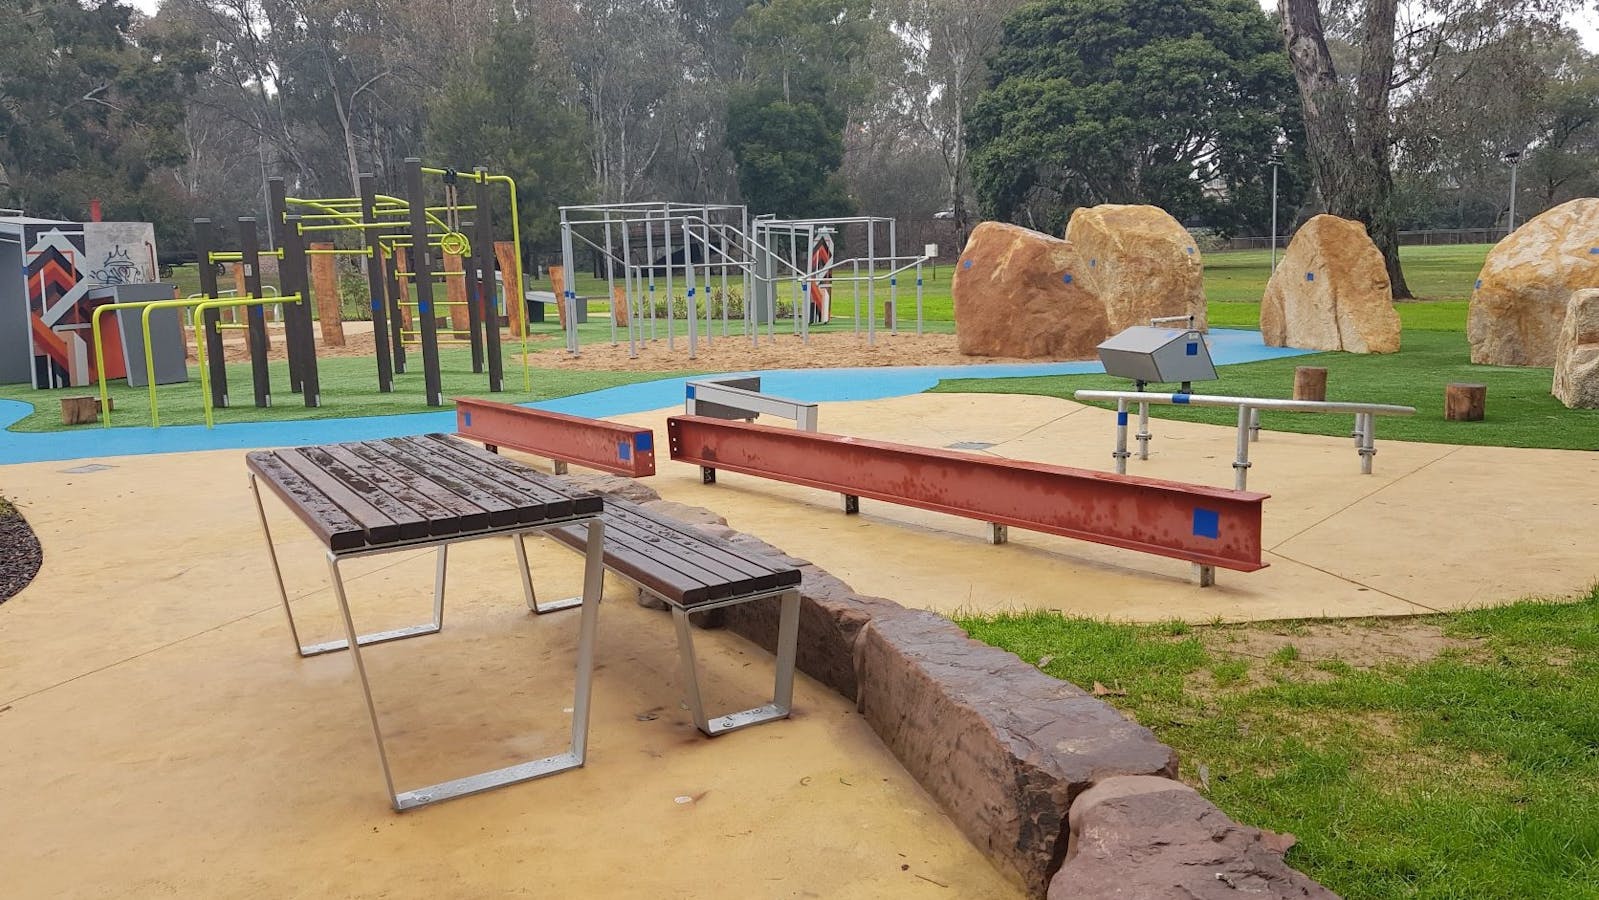 Table and seat, beam structures for climbing, rocks, path, more climbing structures, parkland, trees